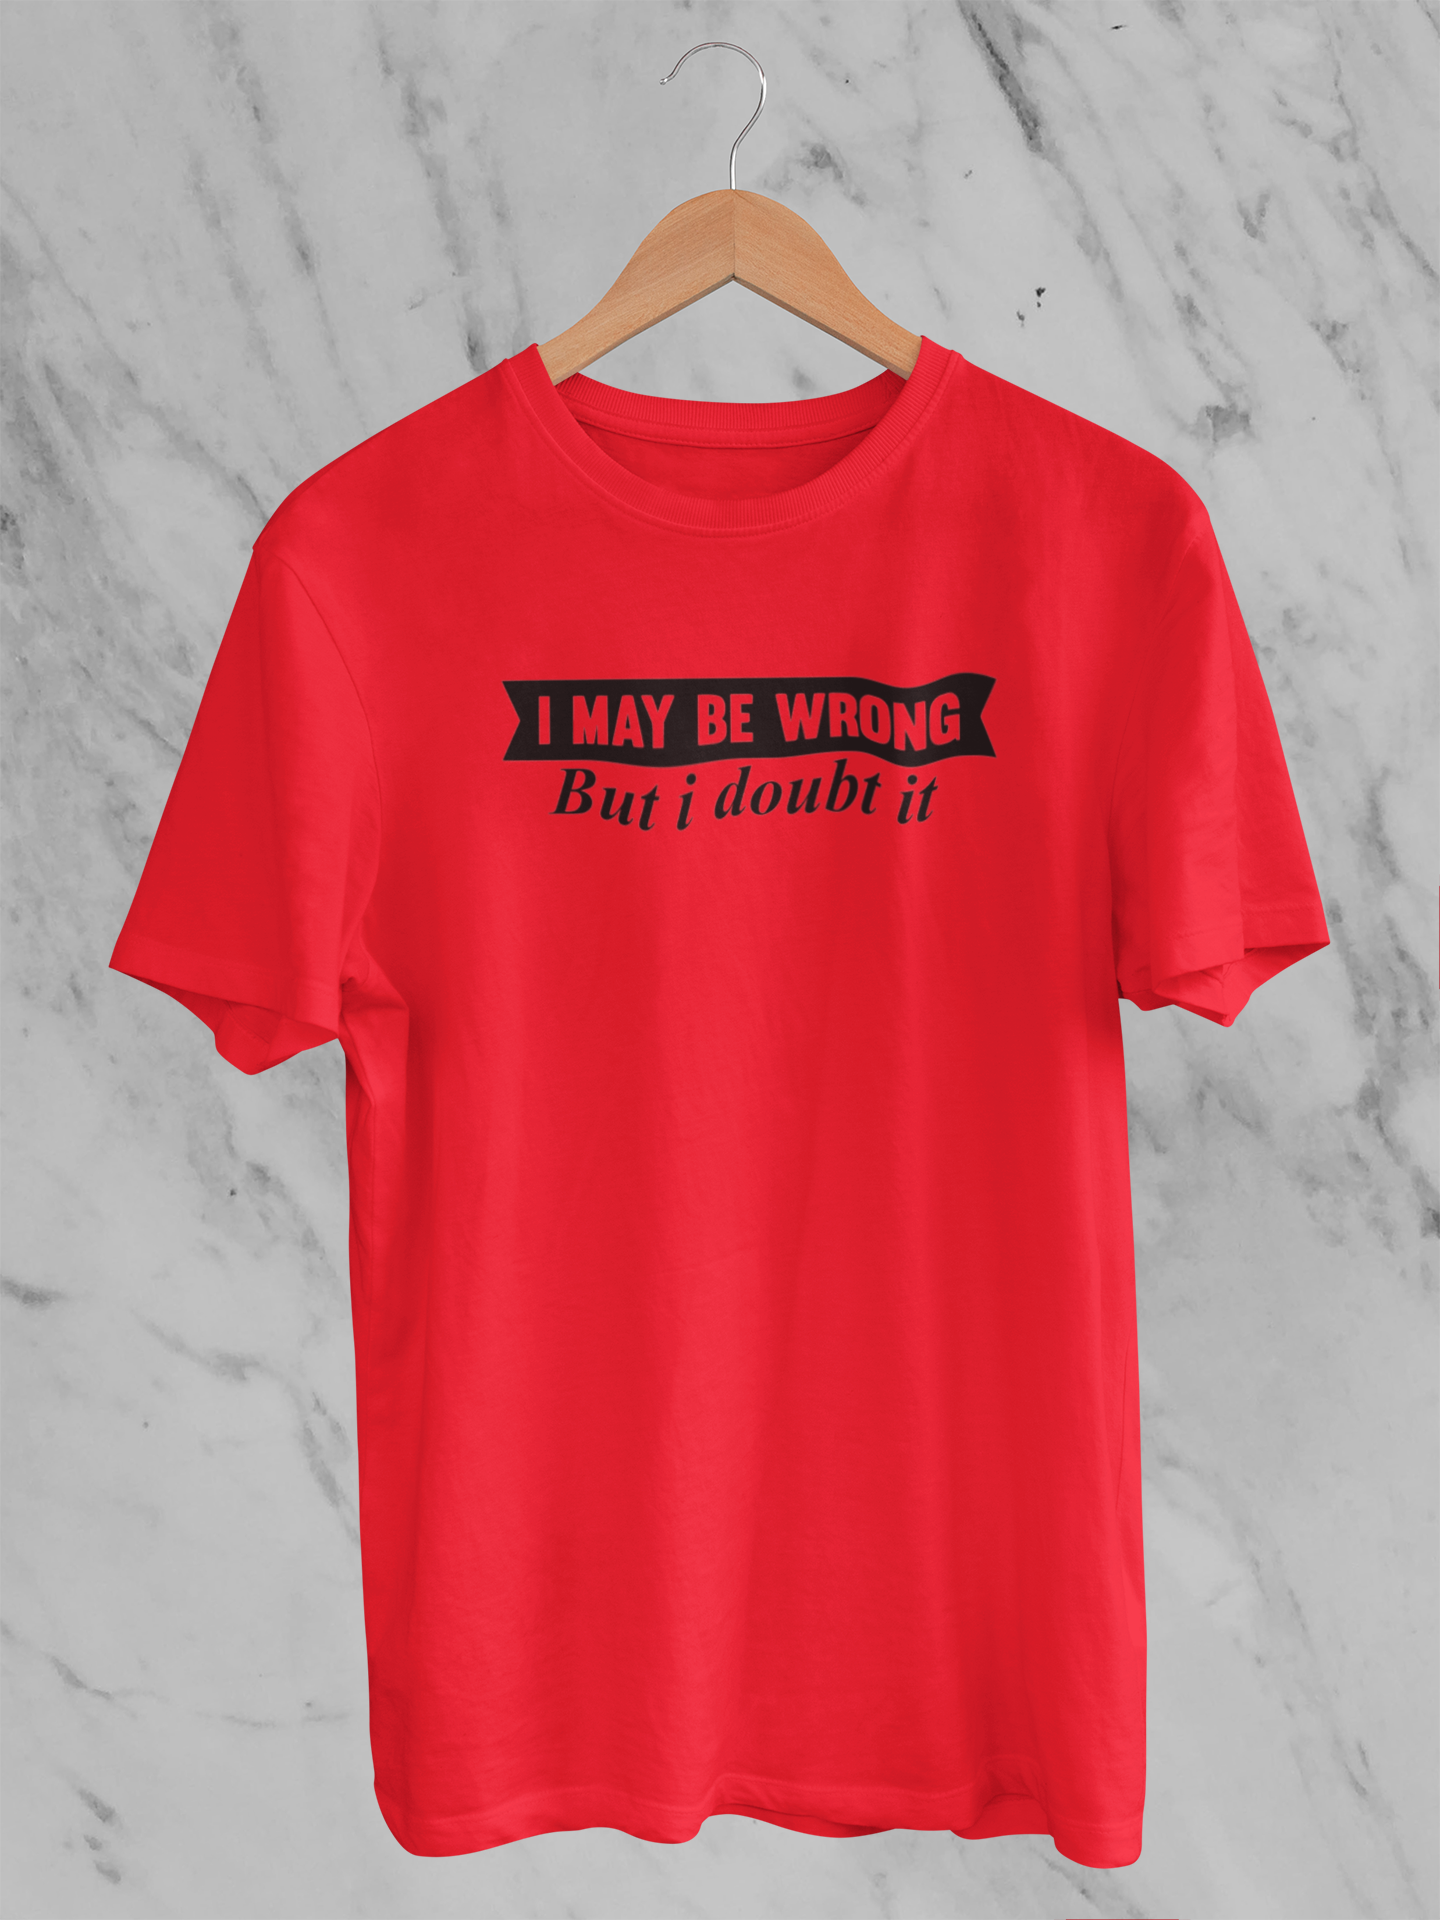 I may be wrong but I doubt it Tee